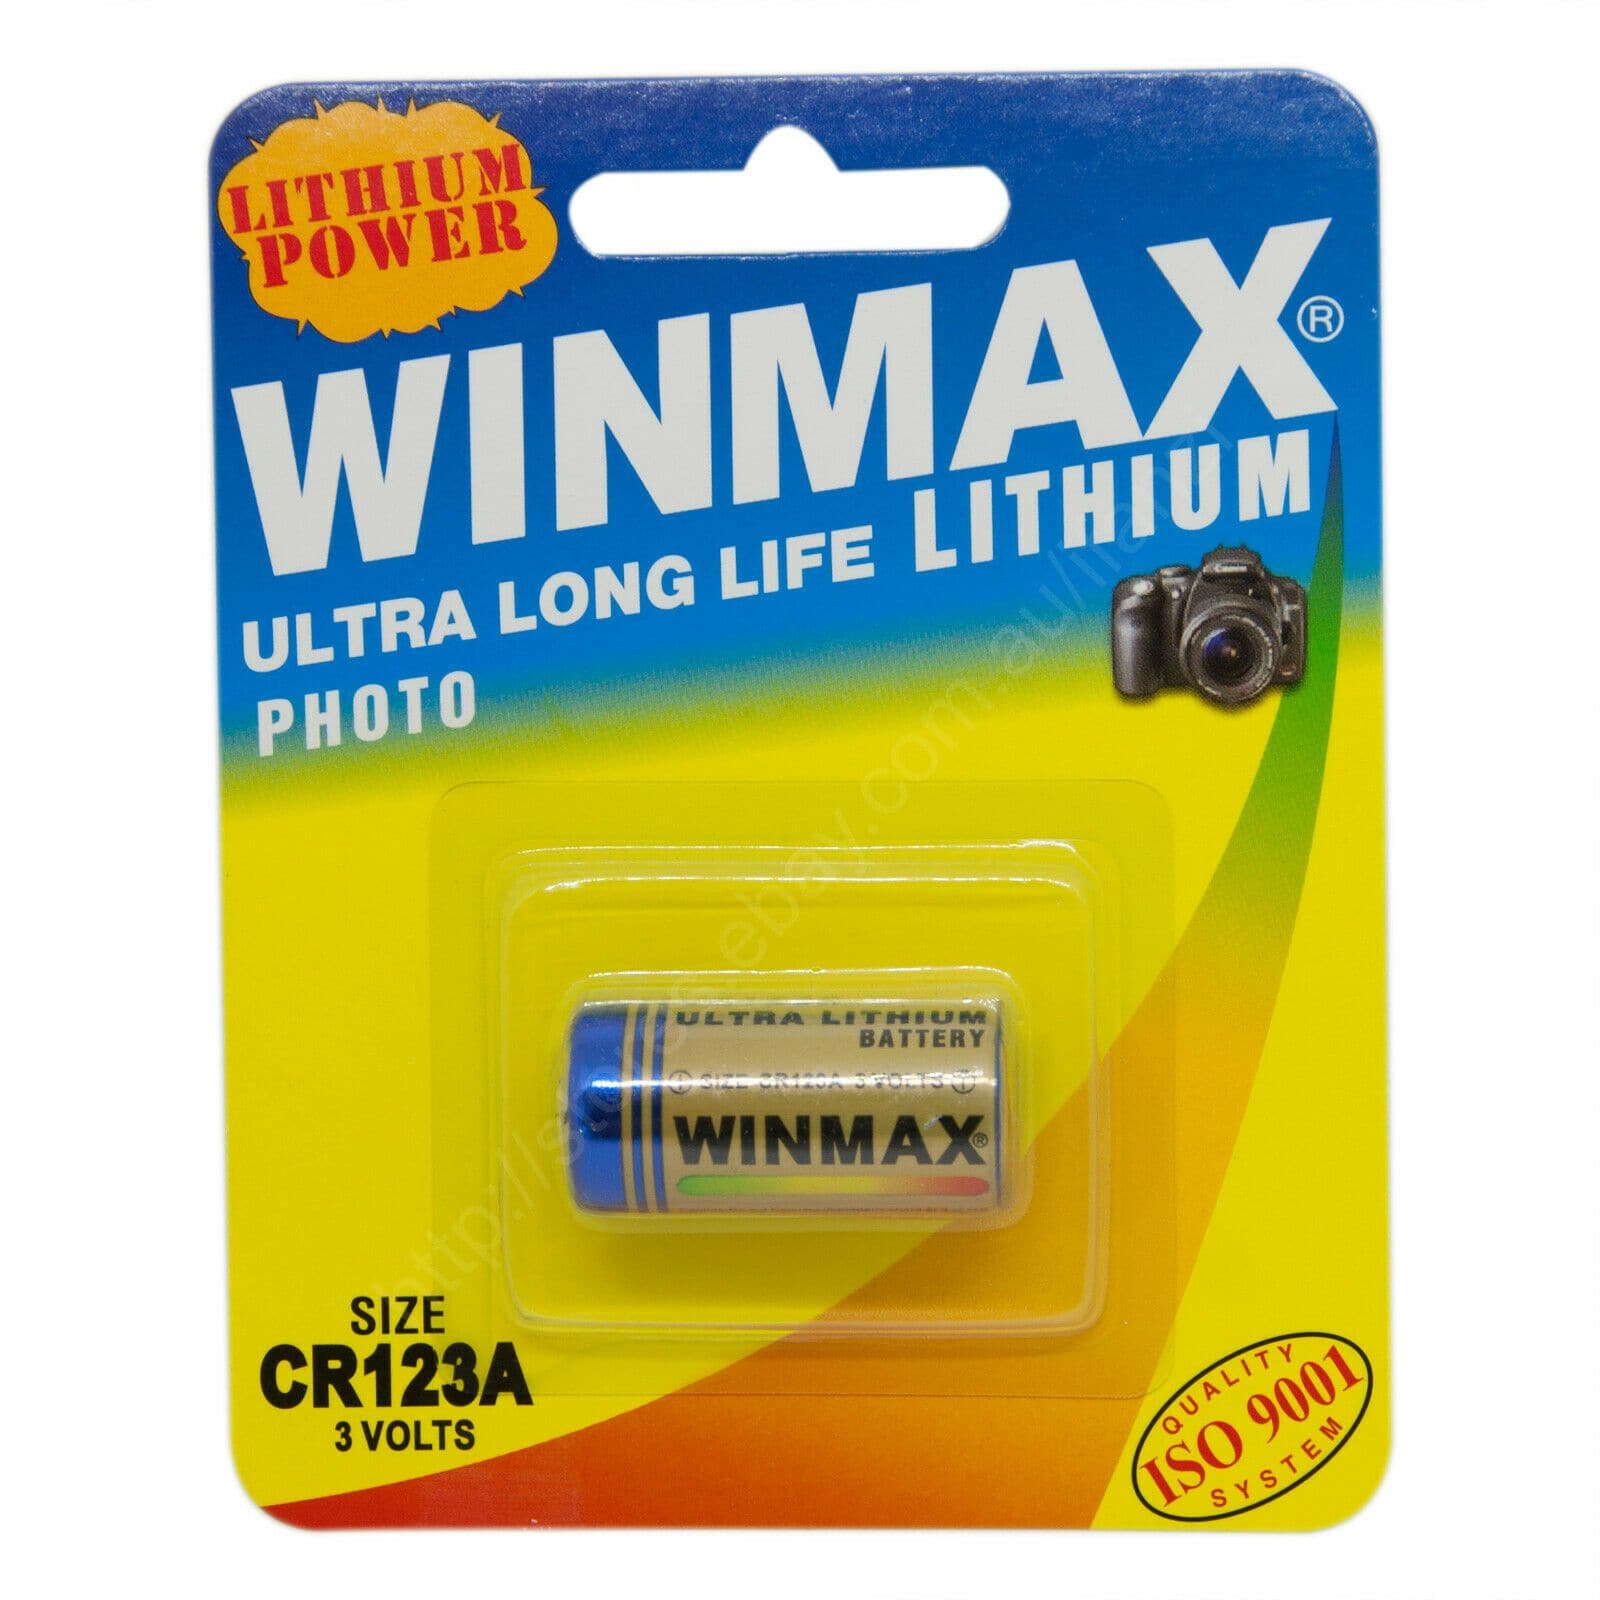 WINMAX Ultra Long Life 3V Lithium Battery For Camera CR123A - Double Bay Hardware